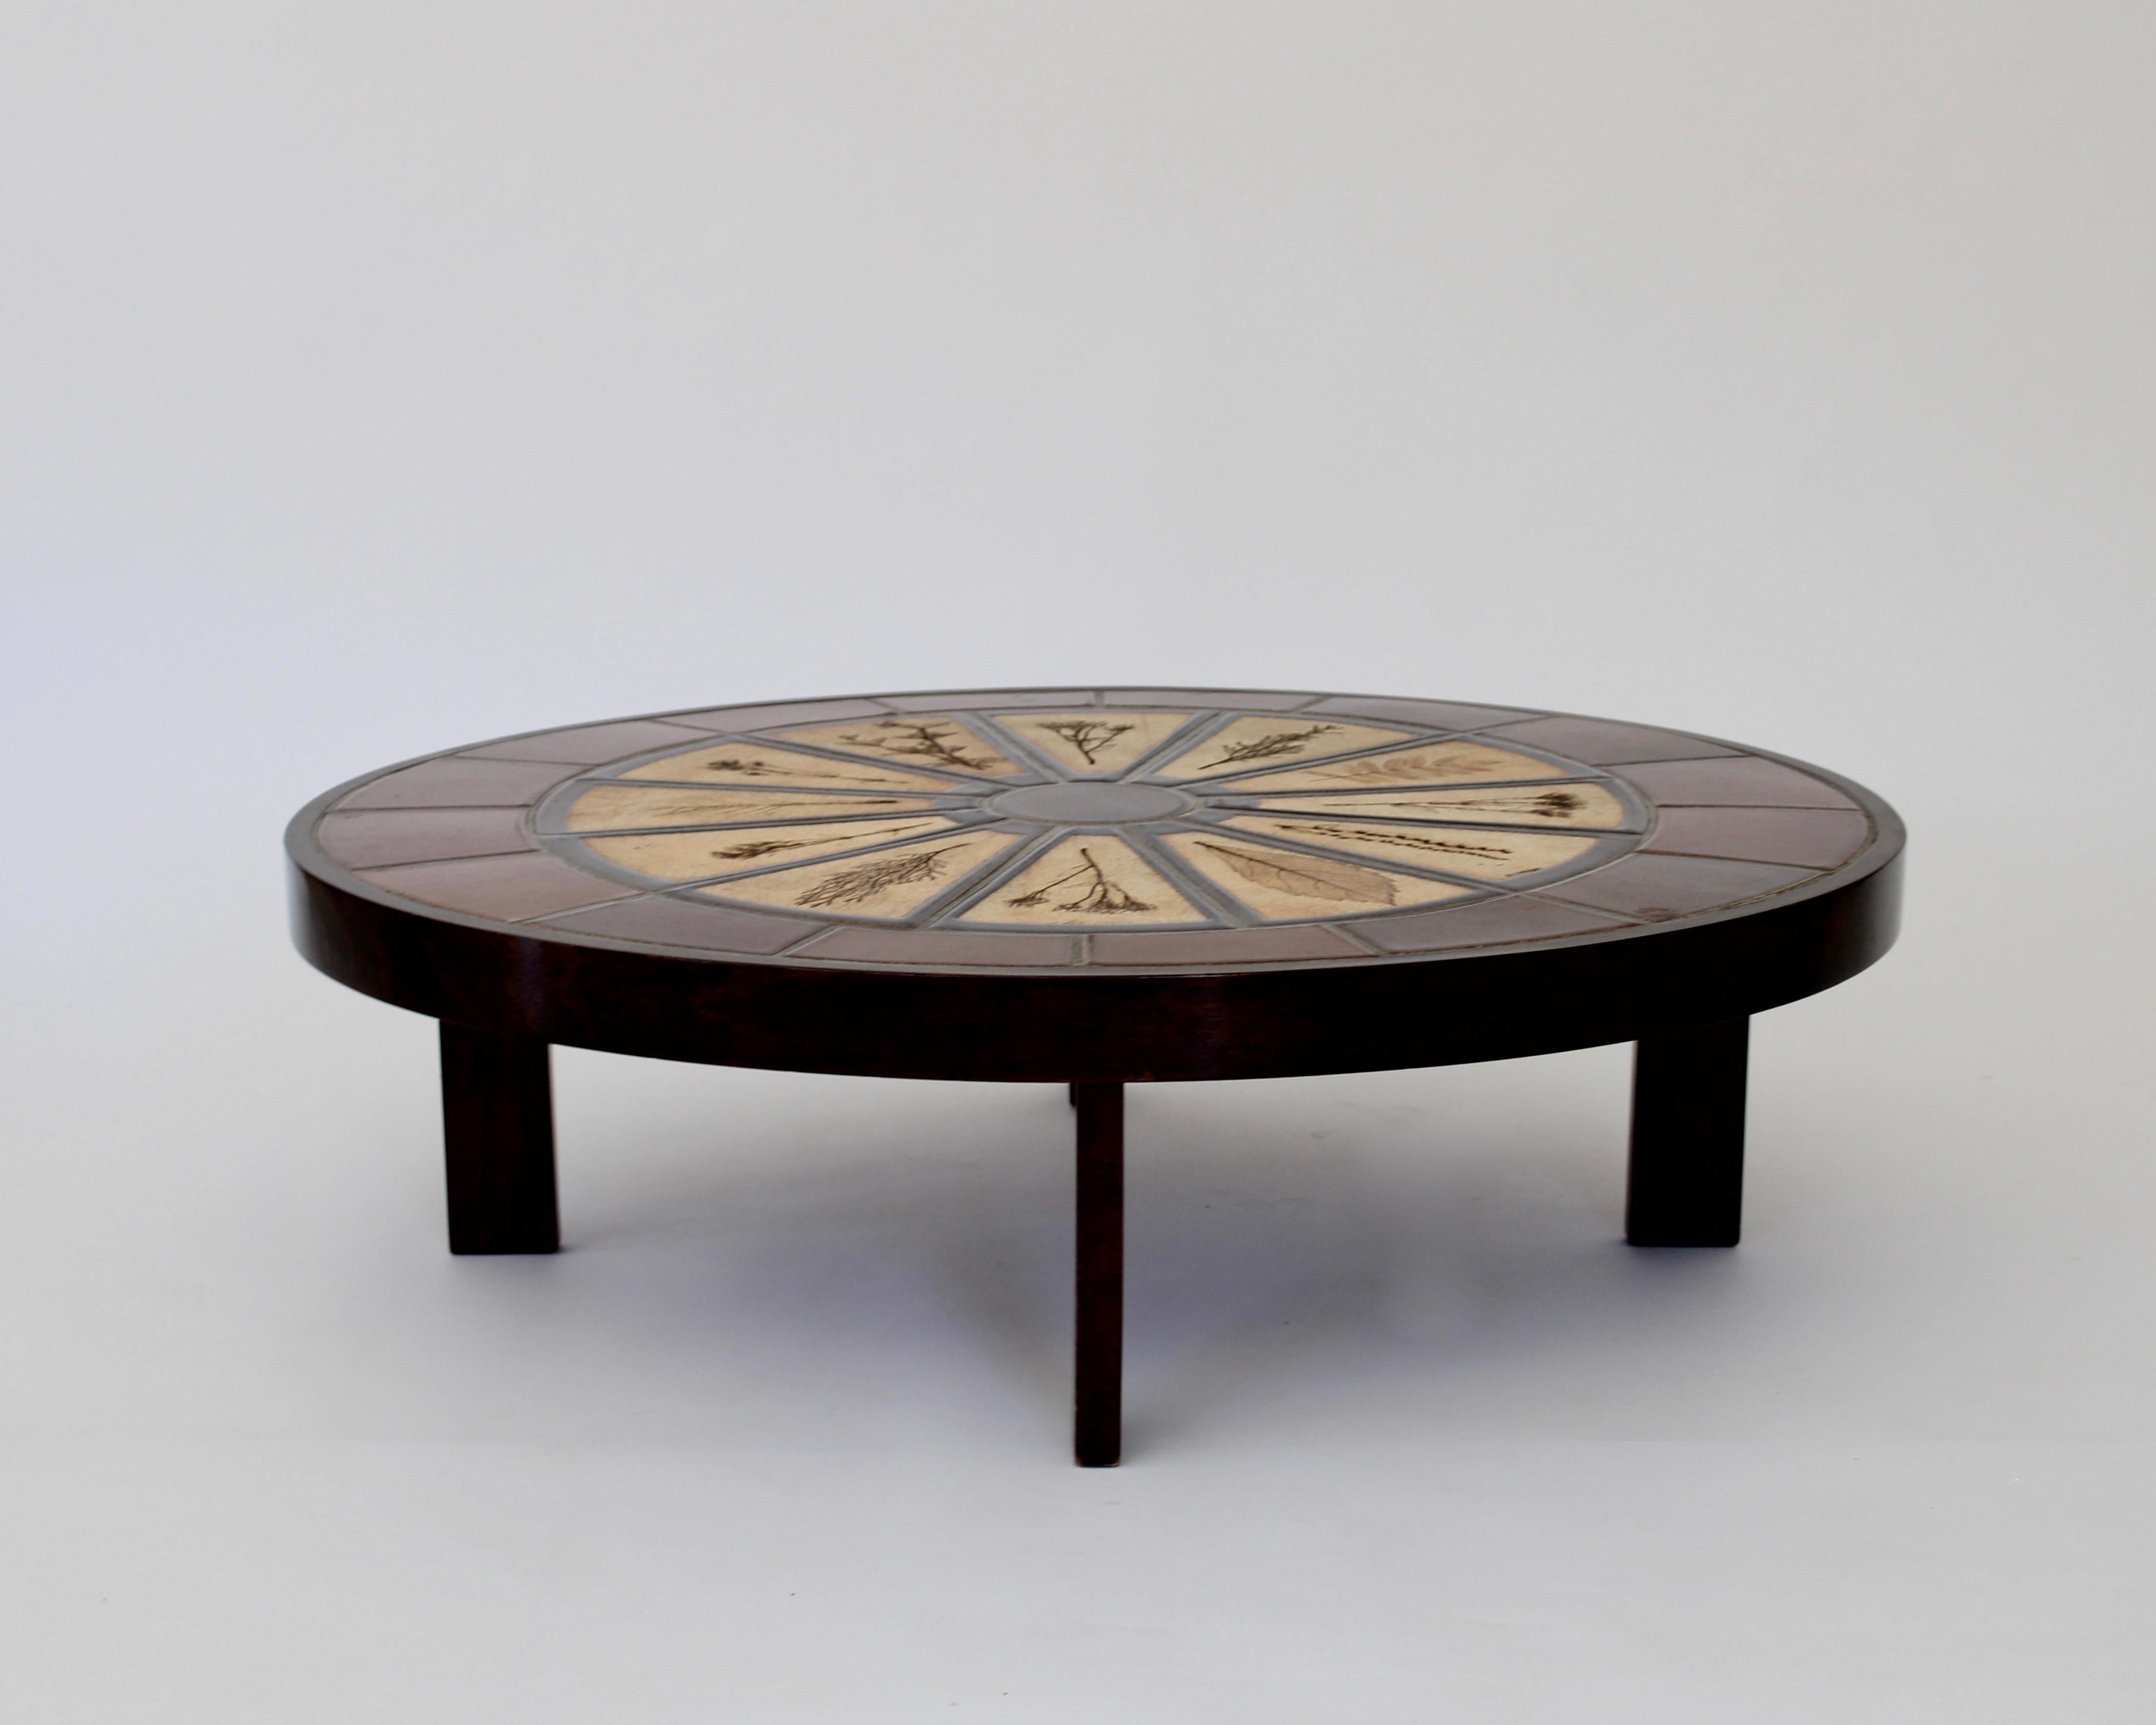 Roger Capron ceramic coffee table with impressed leaf decorations. The leaves are from the surrounding woods and gardens of Vallauris where Capron had his studio. 
The table is more oval than completely round. 
Signed R Capron
No chips or cracks